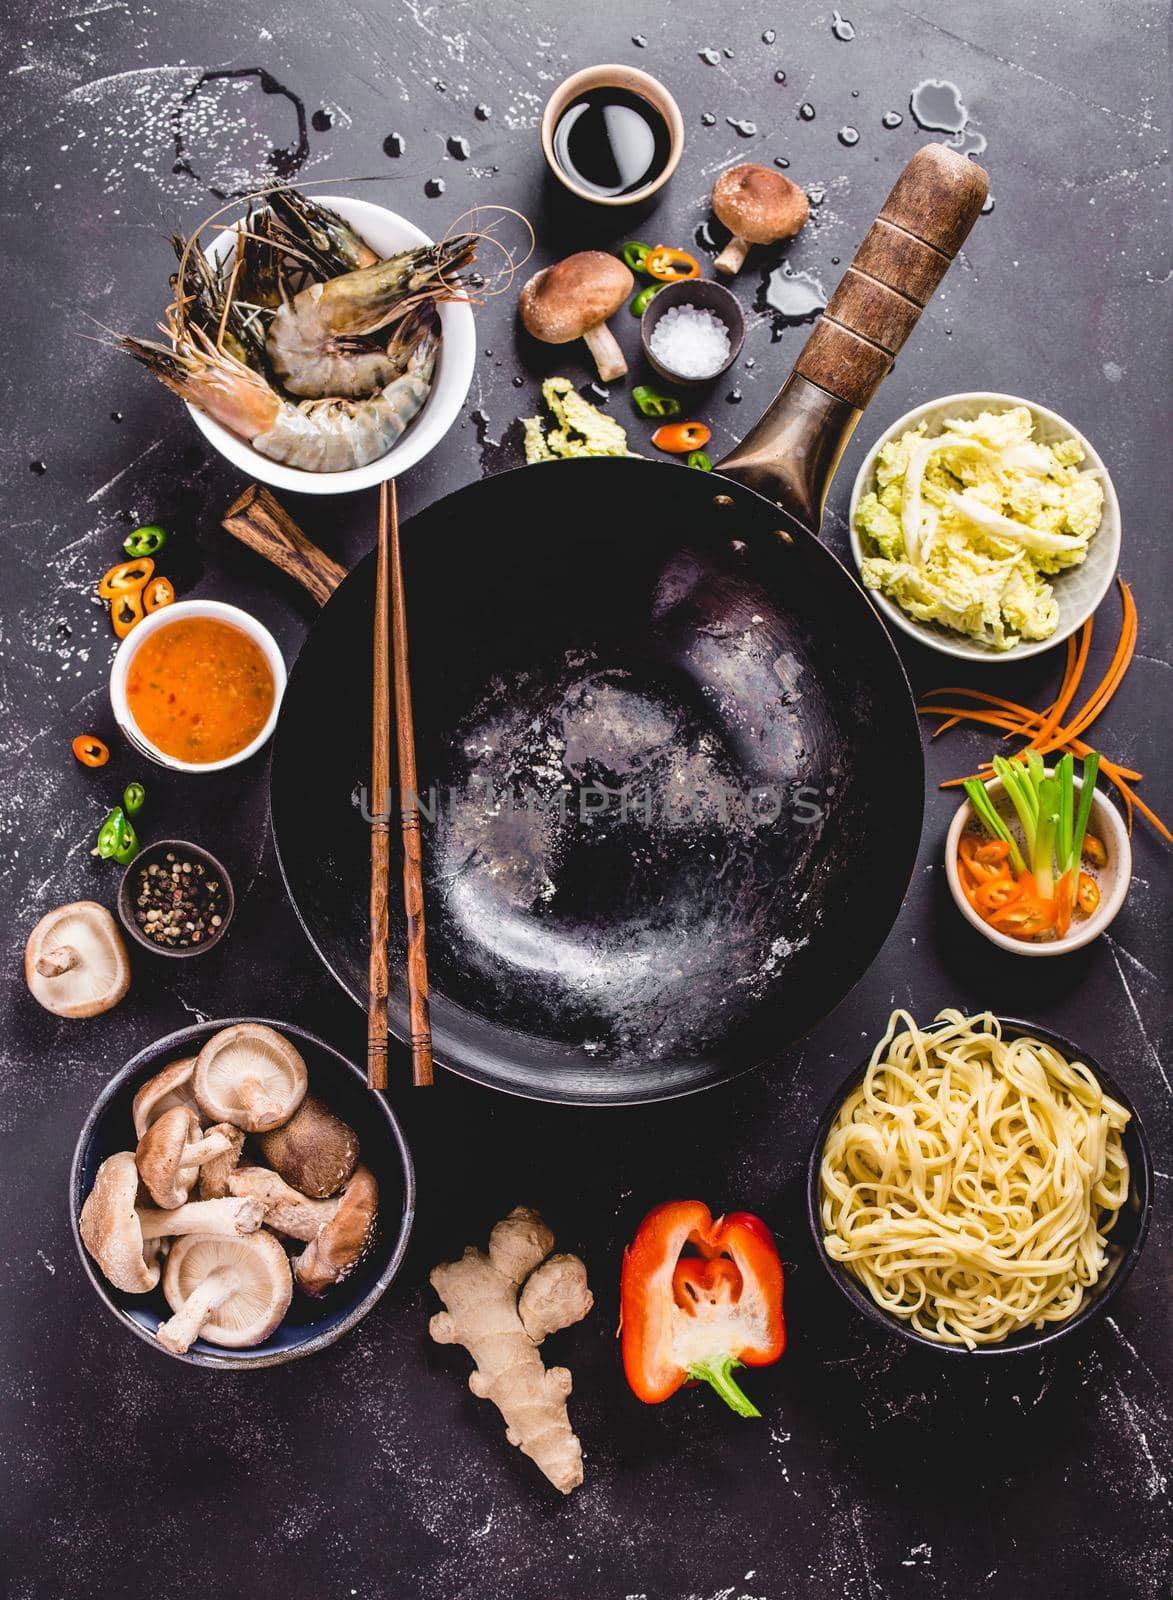 Asian food cooking concept. Empty wok pan, noodles, vegetables stir fry, shrimps, sauces, chopsticks. Asian/Chinese food. Top view. Ingredients for making Asian/Chinese dinner. Chinese noodles